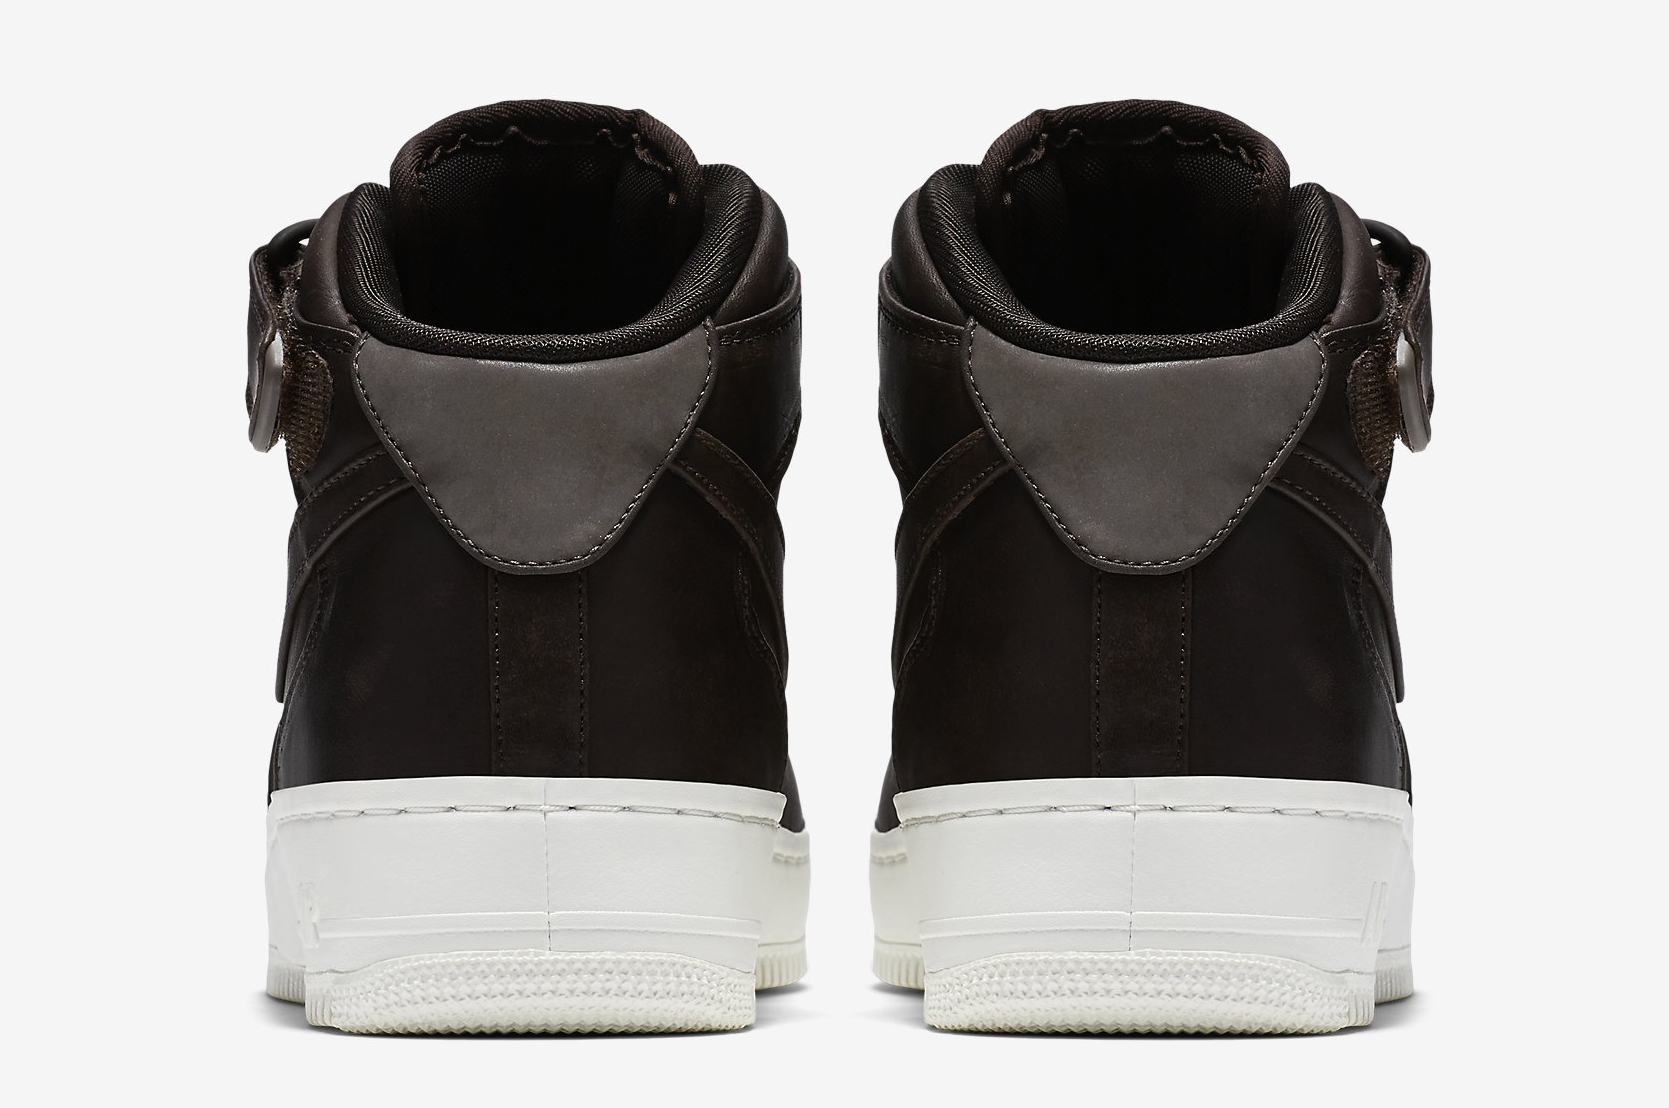 Now Available: Nike Special Field Air Force 1 High Velvet Brown